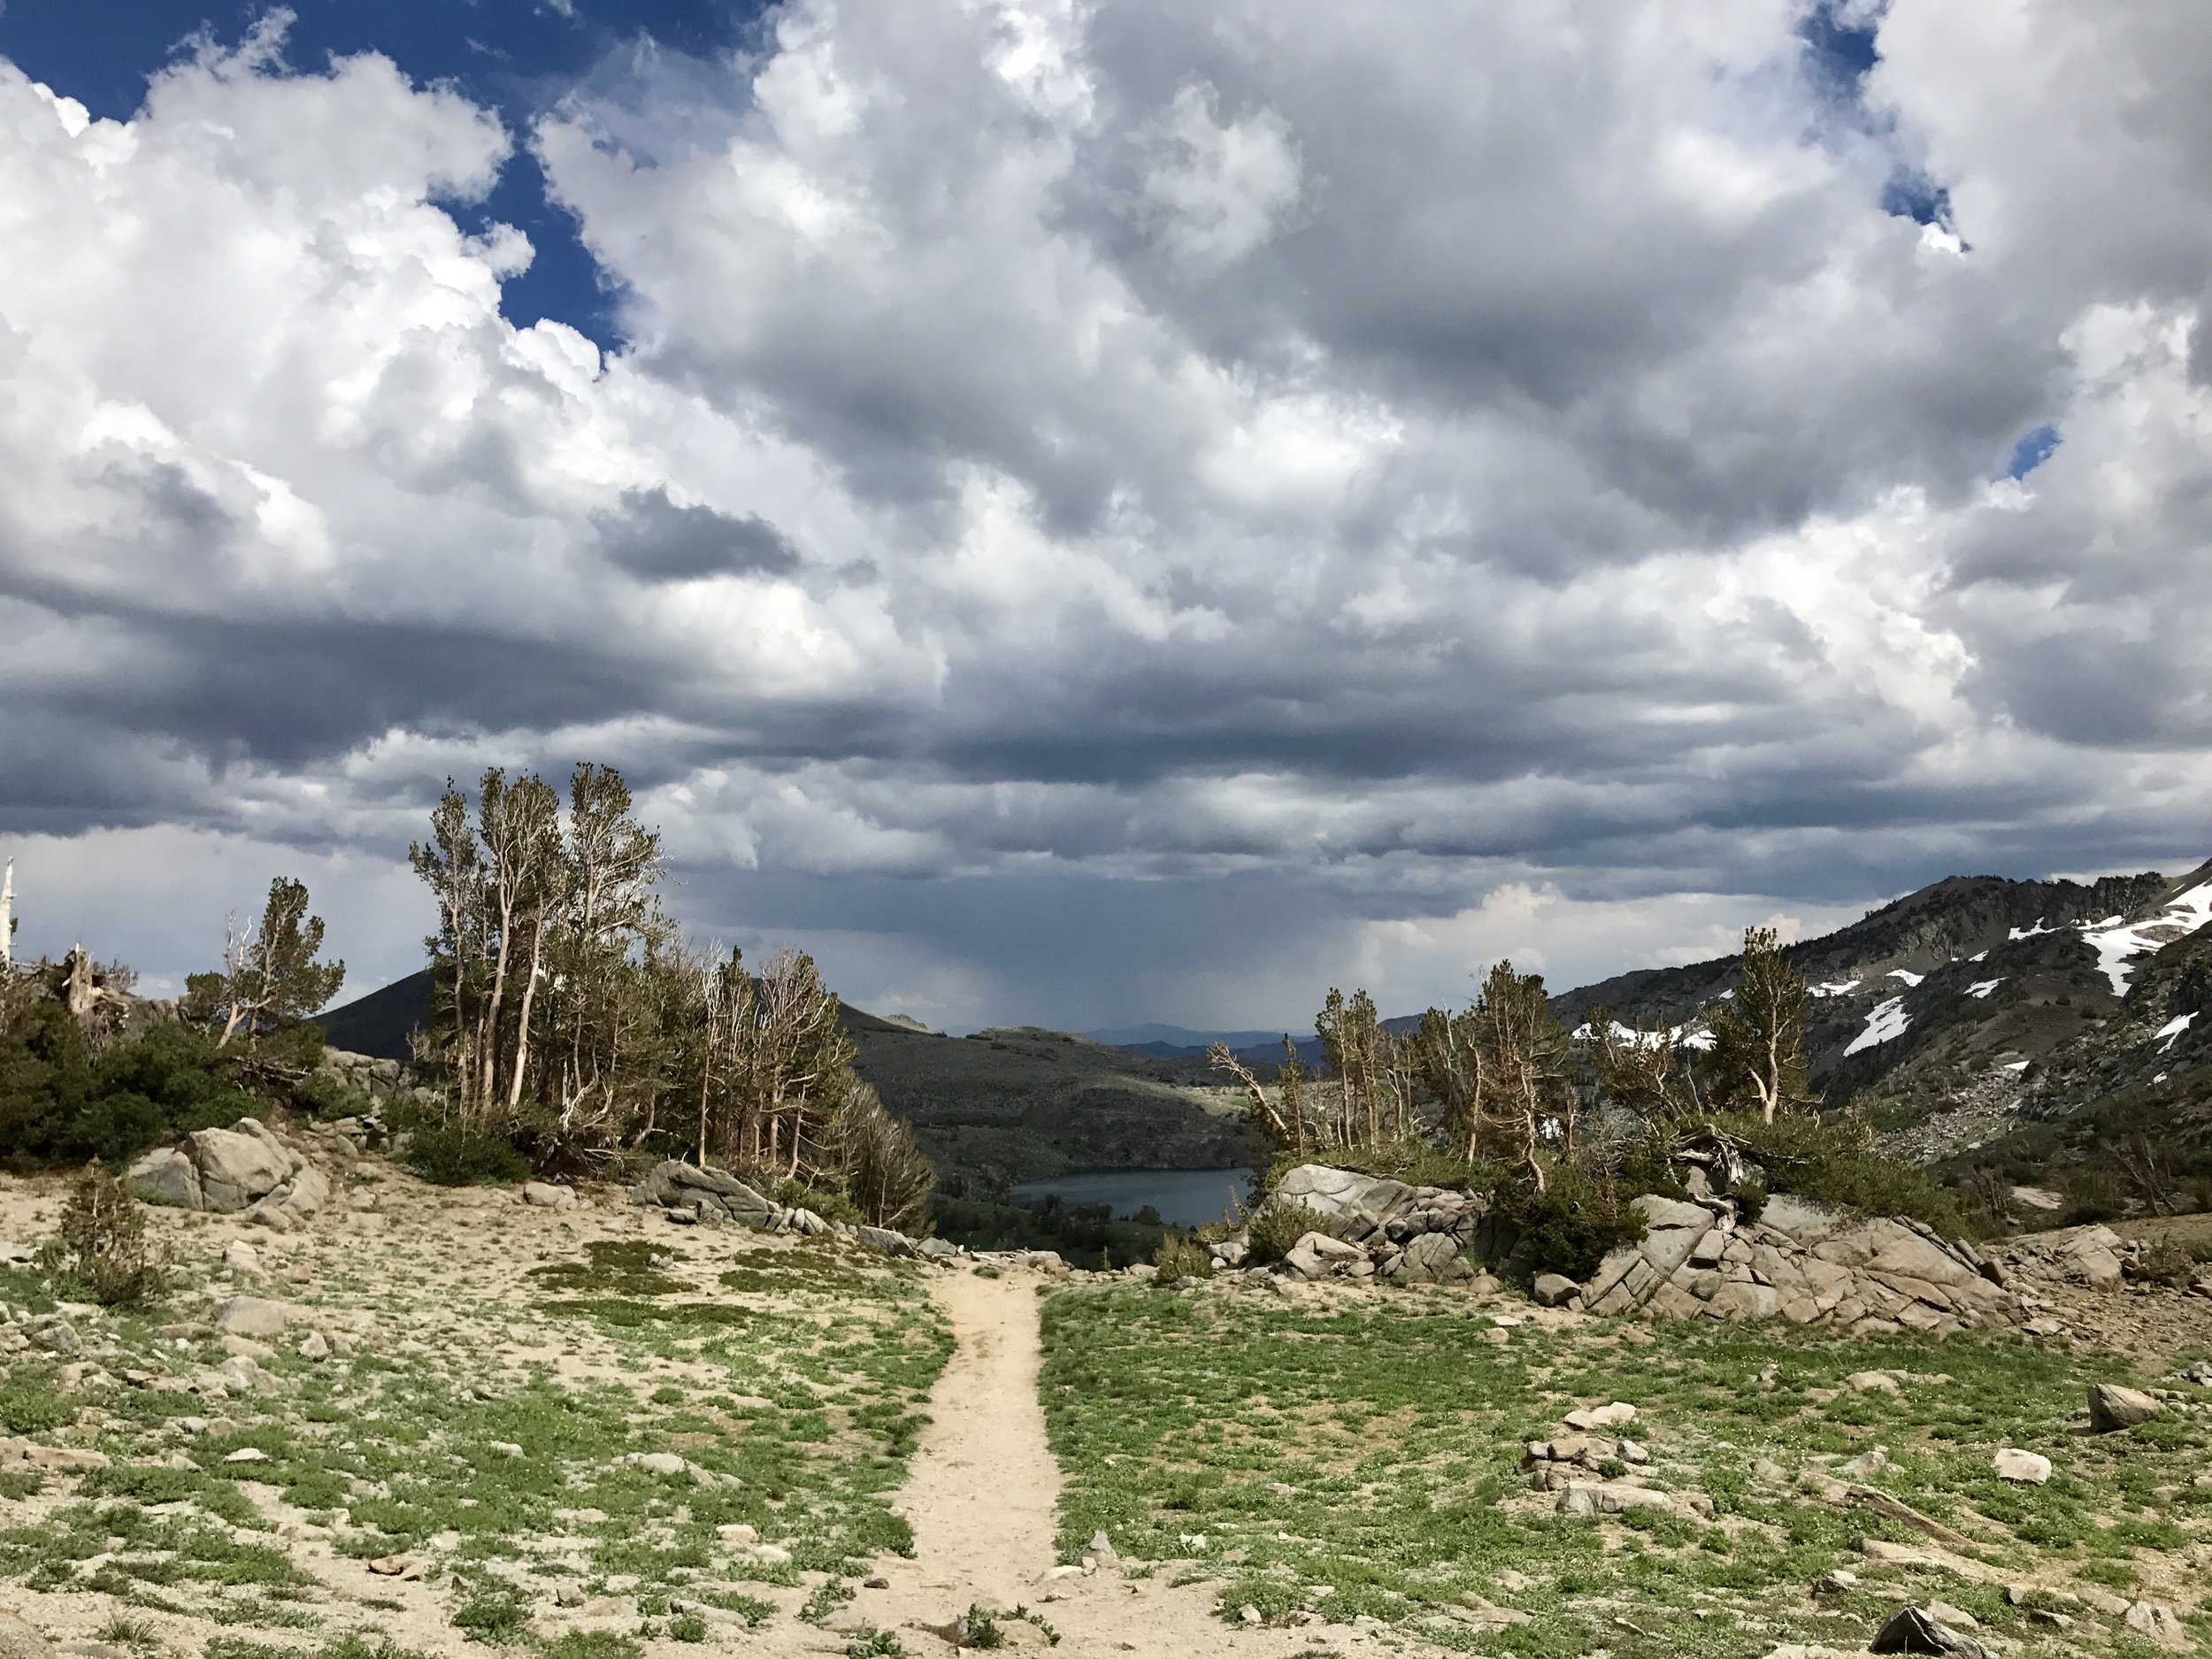   Heading back on the trail with storm clouds looming in the background, heading our way. We almost outran them…  